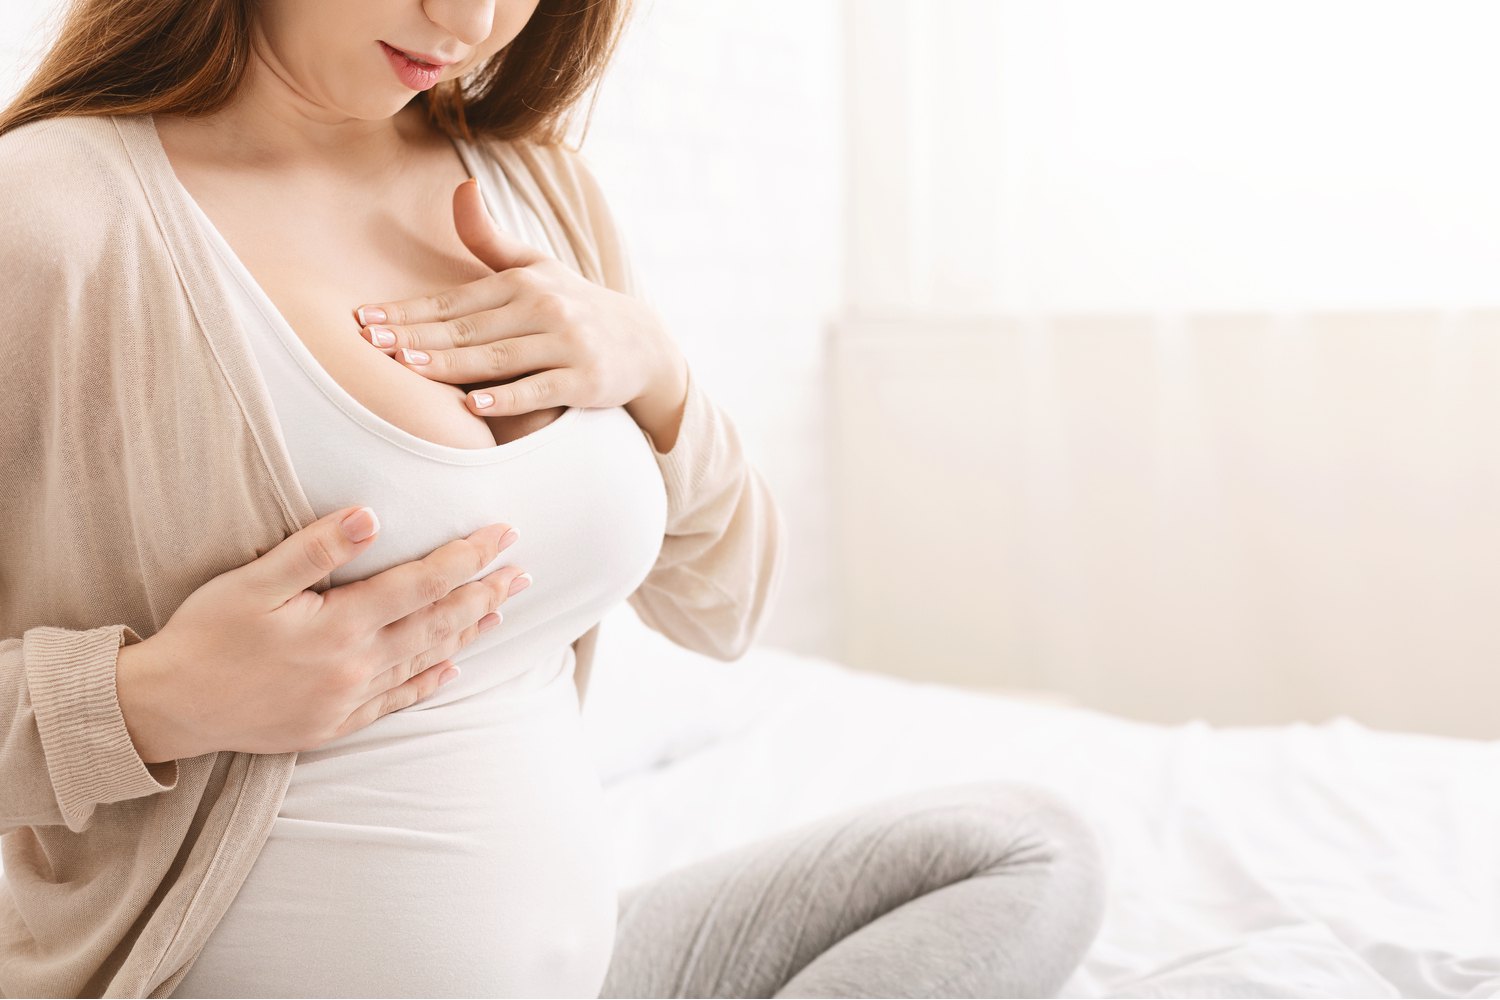 Breast Changes In Pregnancy: What To Expect